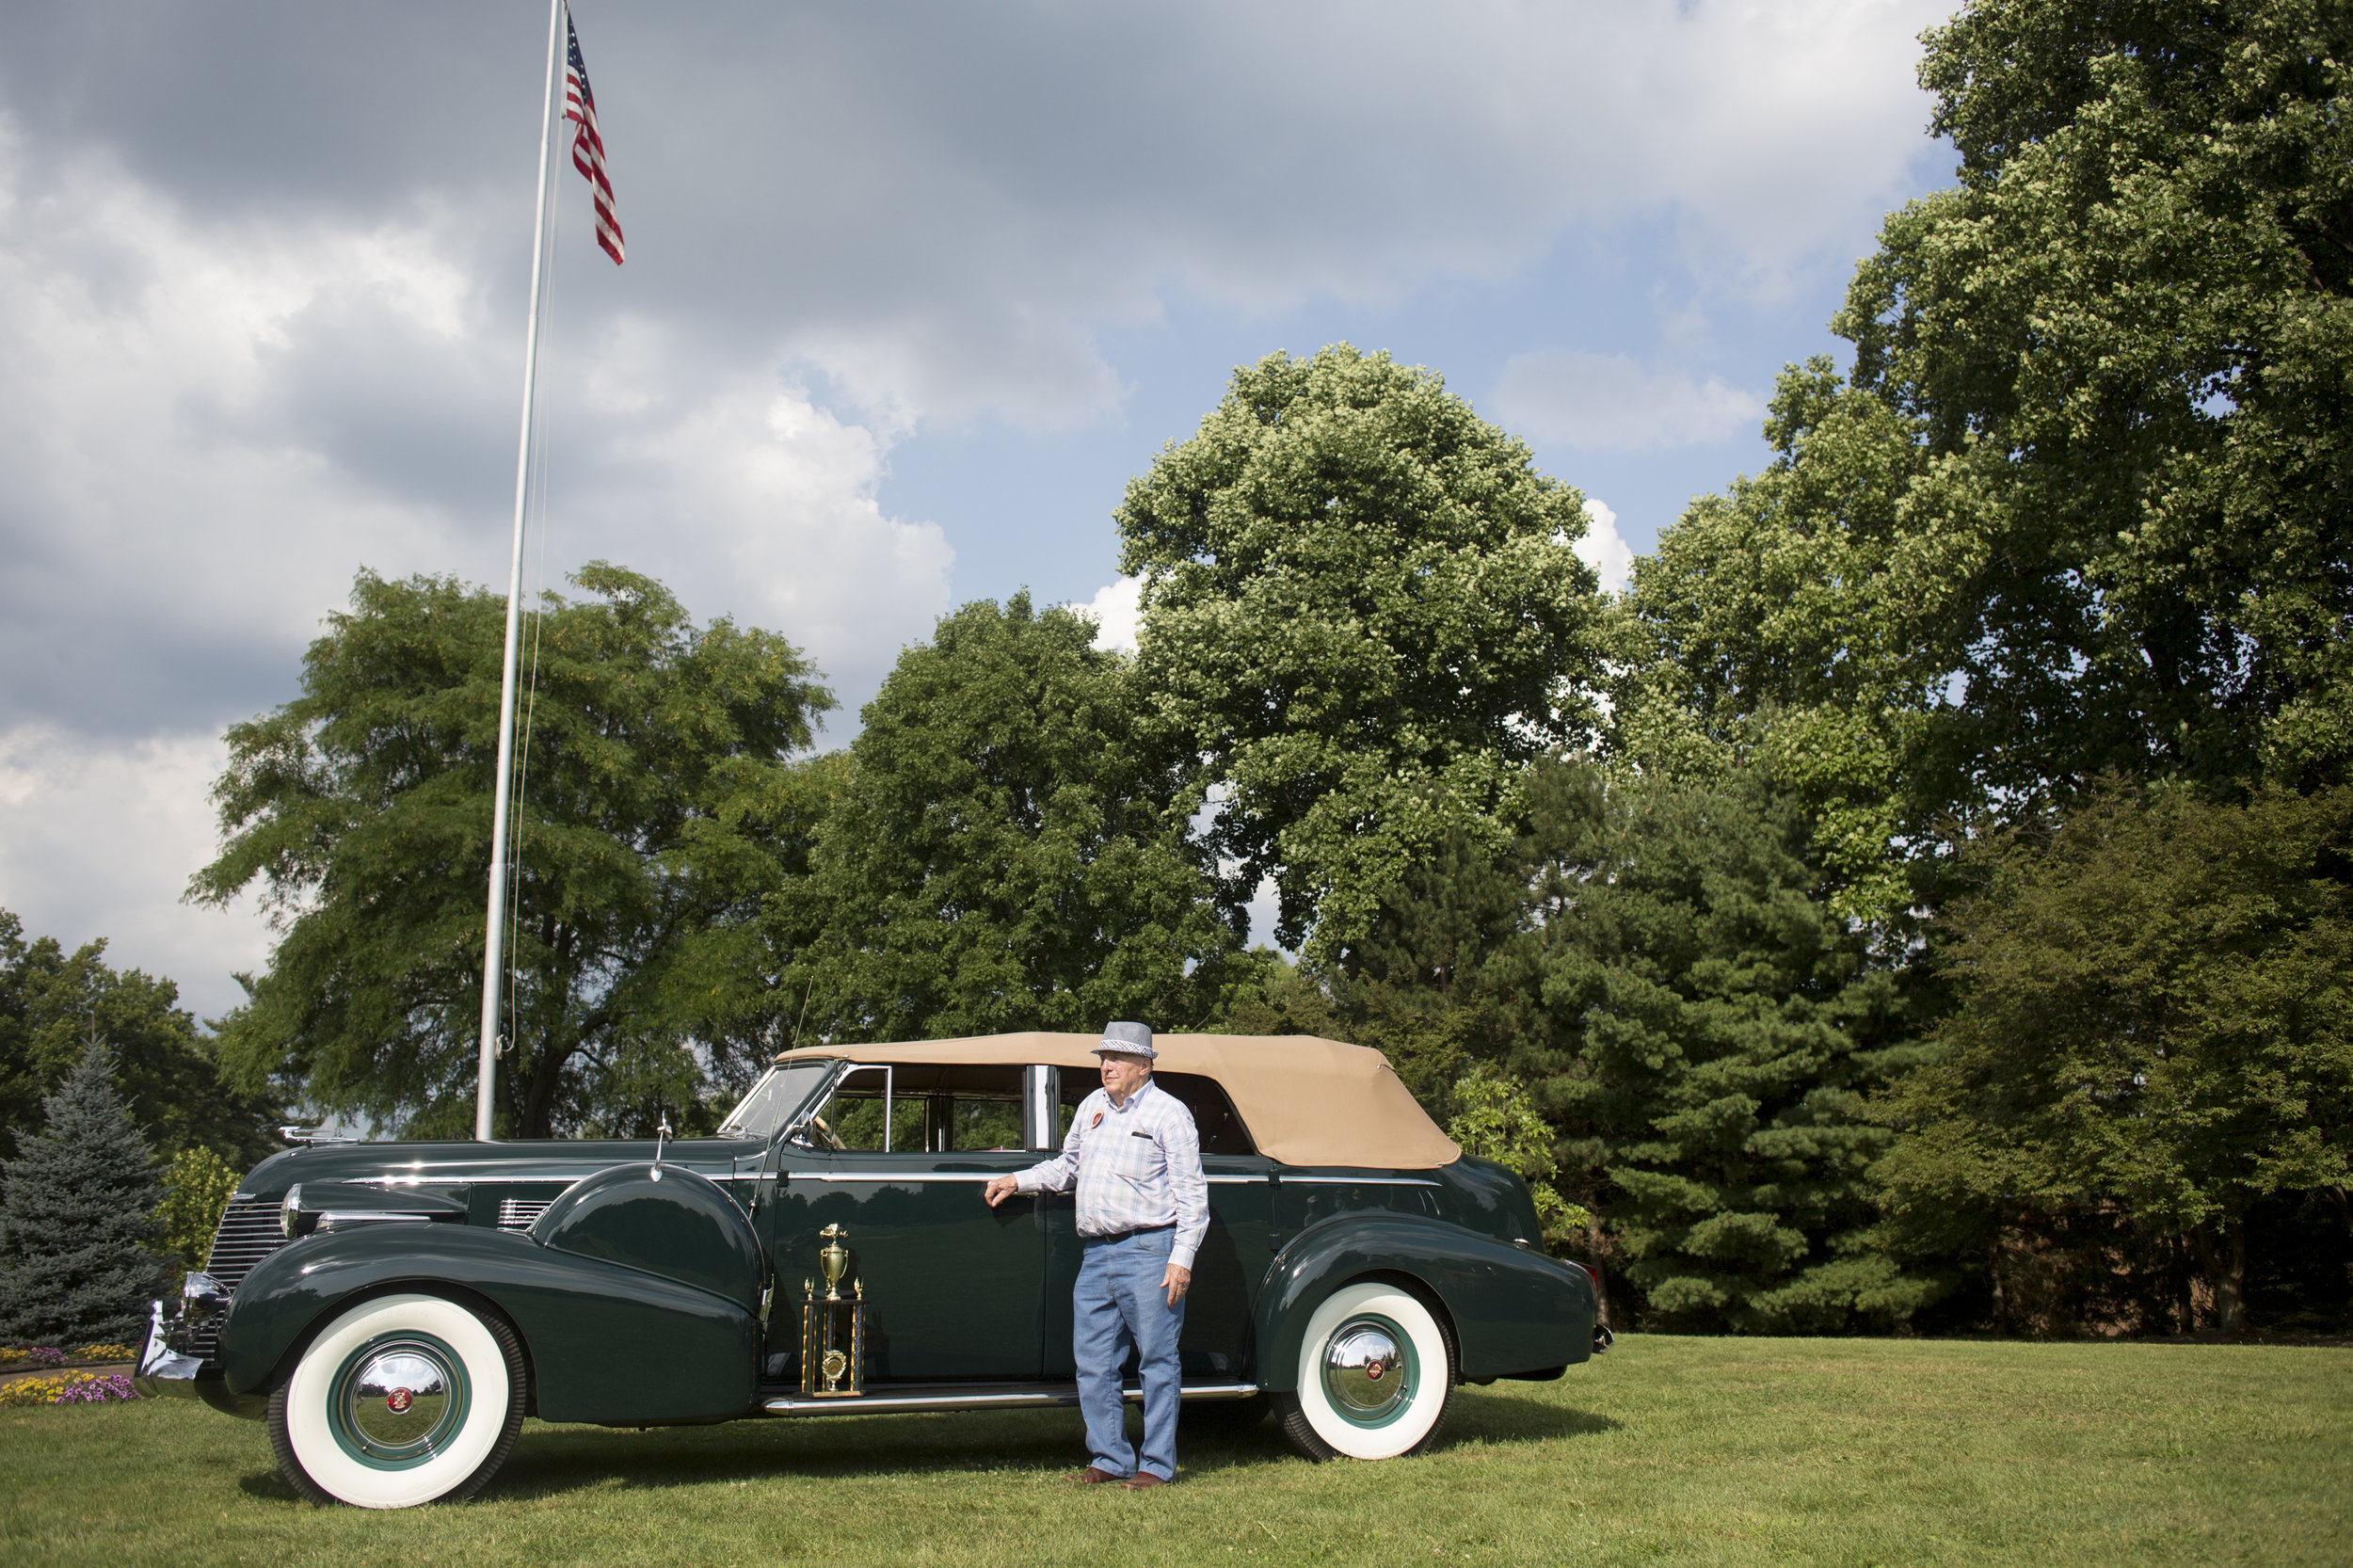  Fred Wicker, of Canfield, Ohio, poses with his 1940 Cadillac after winning Best of Show for authentic vehicles at the Cars in the Park fundraiser car show in Boardman Park on Sunday, Aug. 5, 2018. 